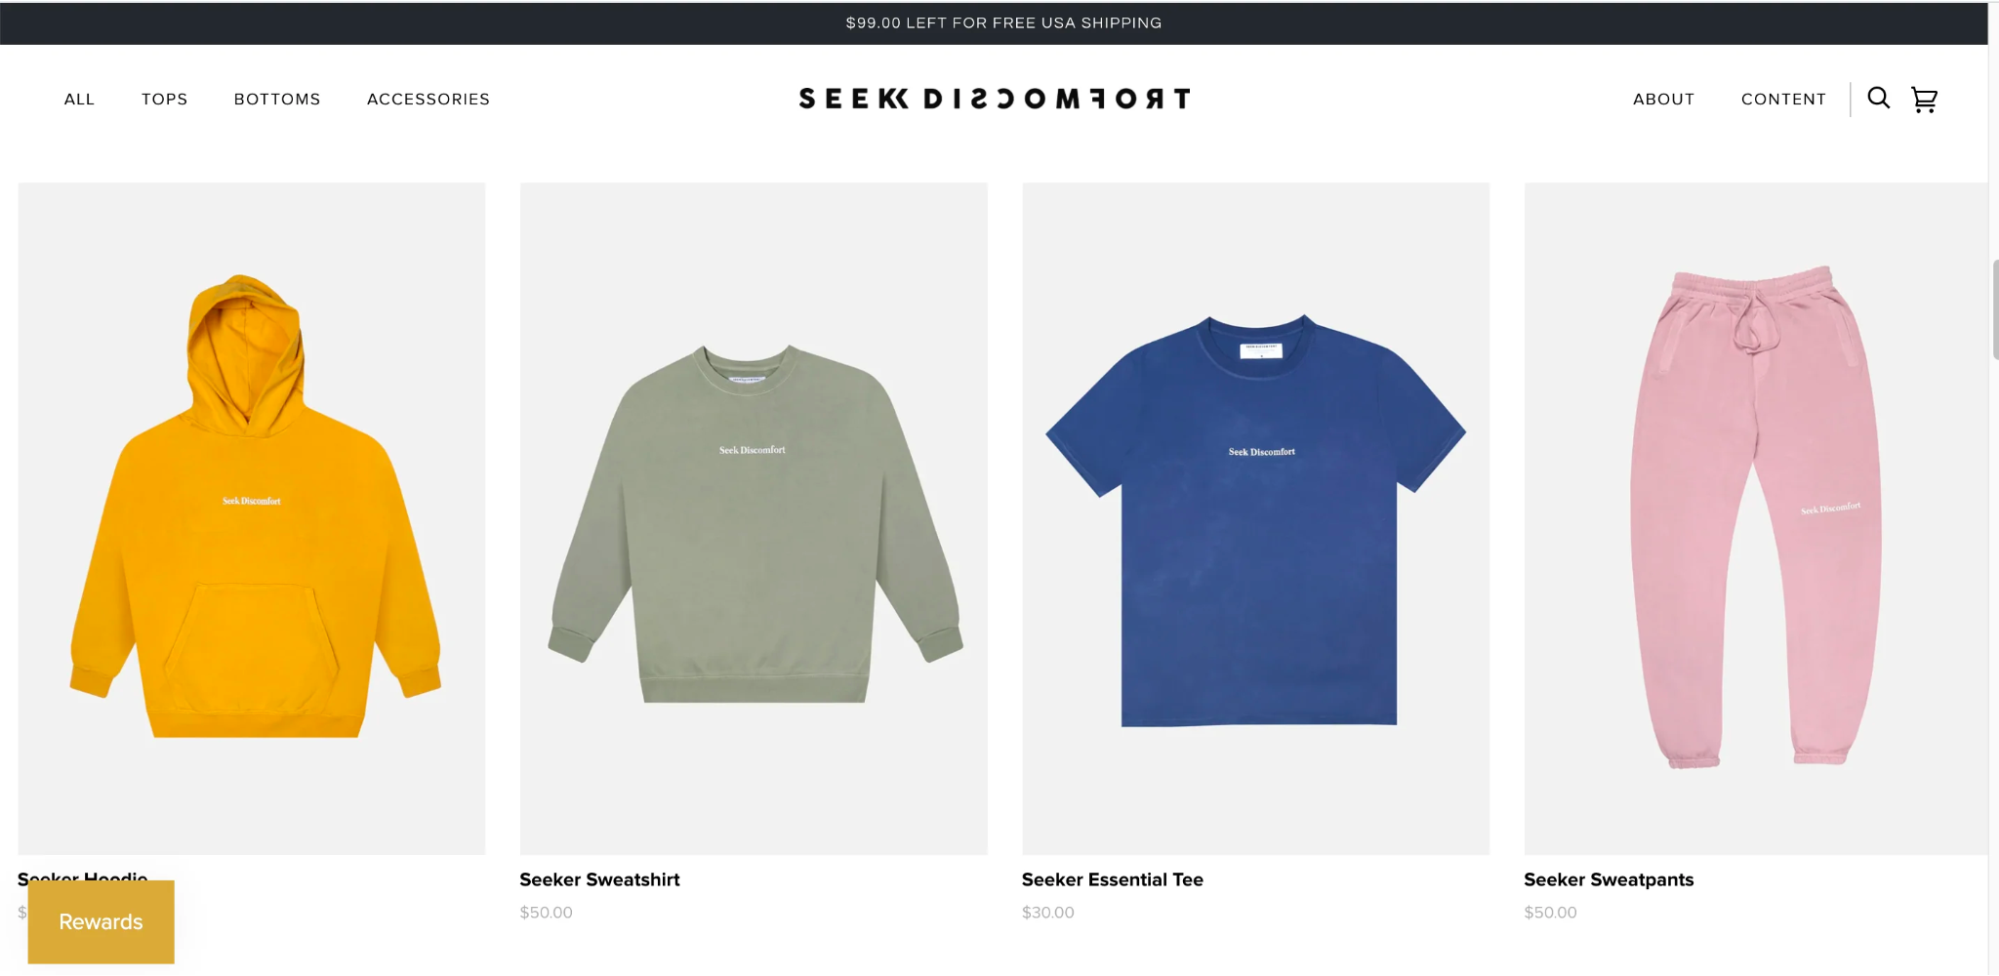 The Seek Discomfort website with brightly colored shirts, sweatshirts, and pants